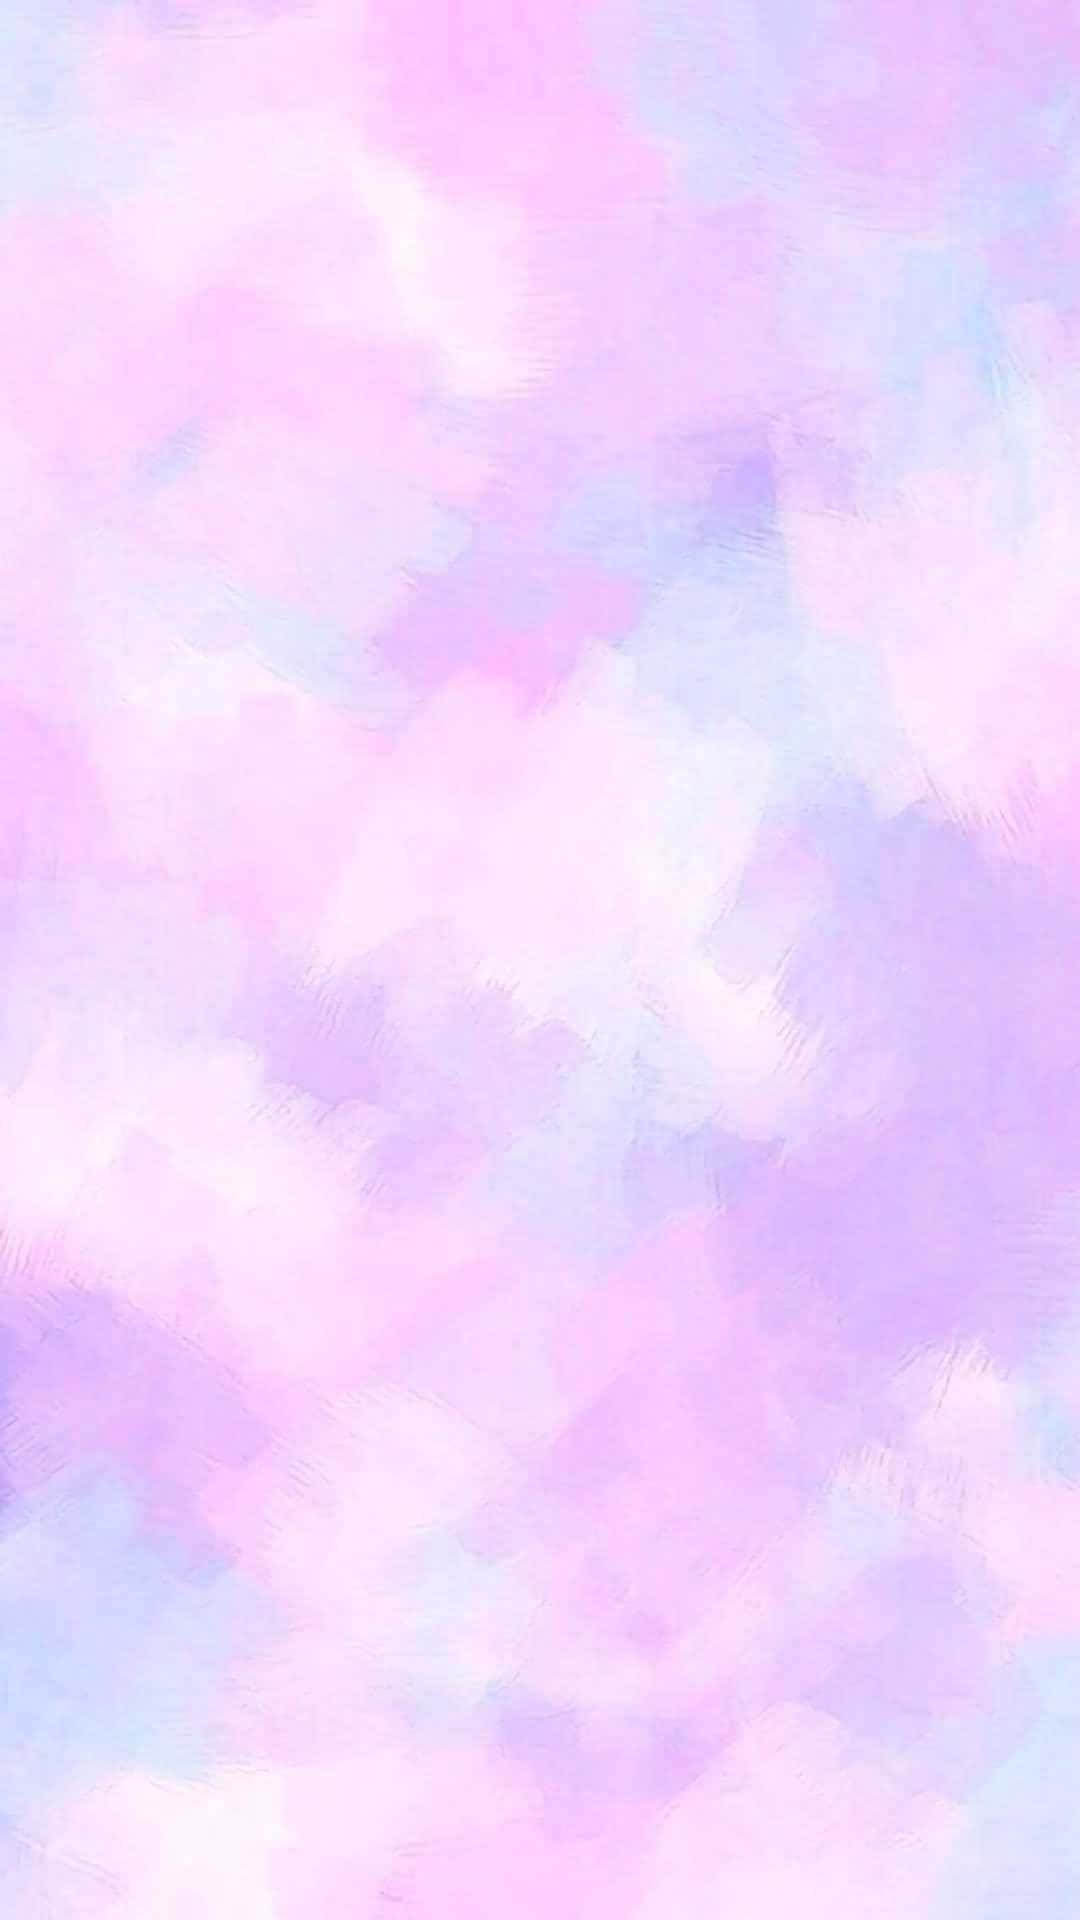 Pastell Ombre 1080 X 1920 Wallpaper